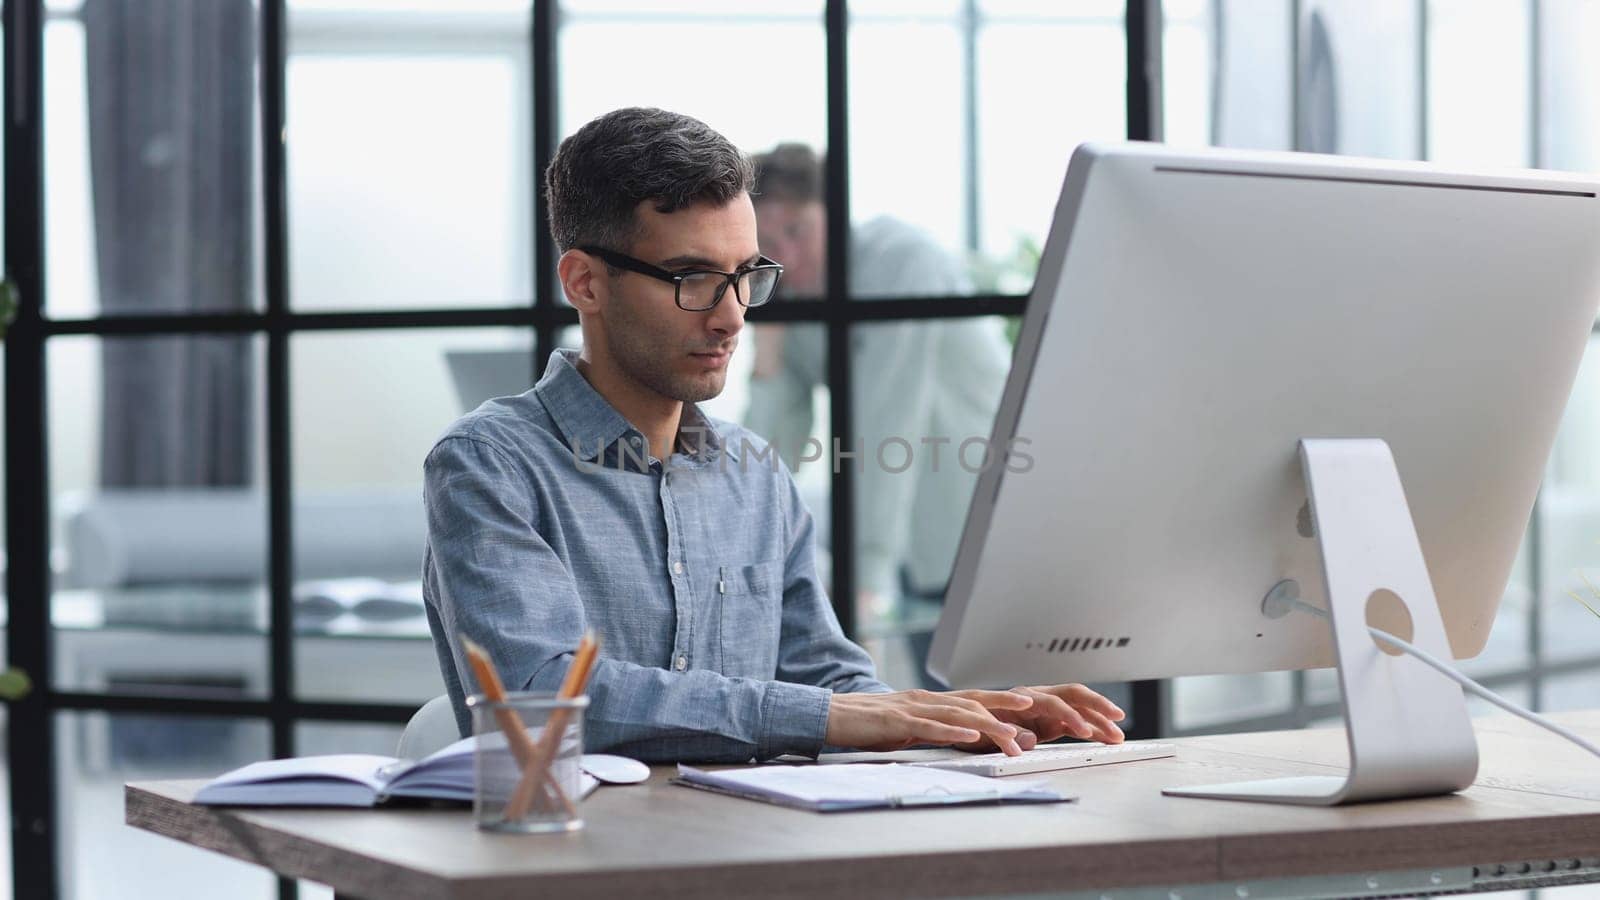 Crisis, problem and mistake, glitch or burnout accountant person working on laptop